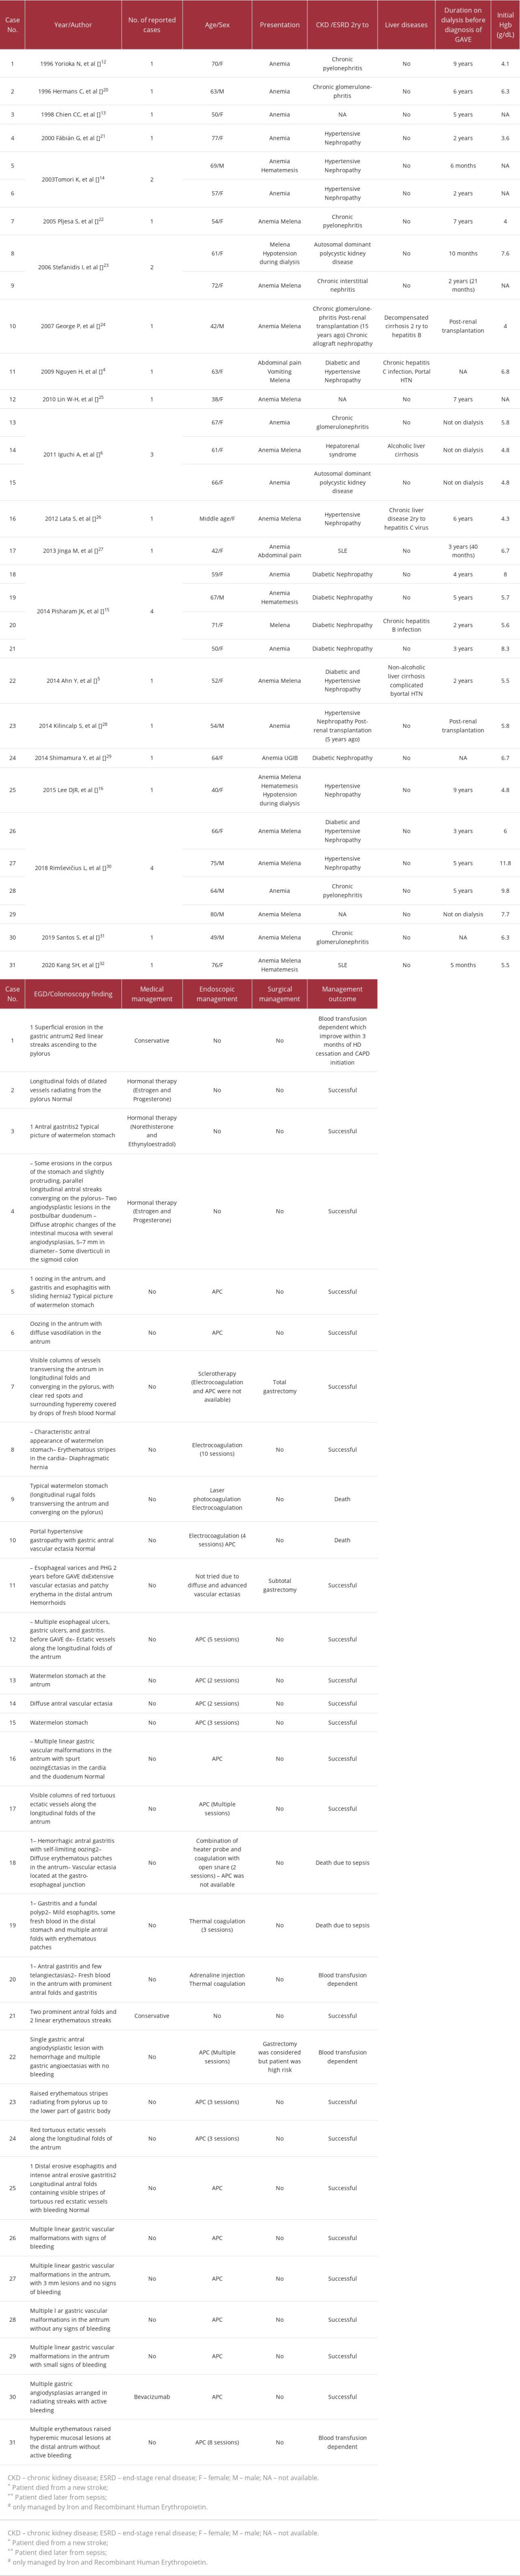 Literature review summary including all reported cases with GAVE in patients with CKD from 1996 to 2020.